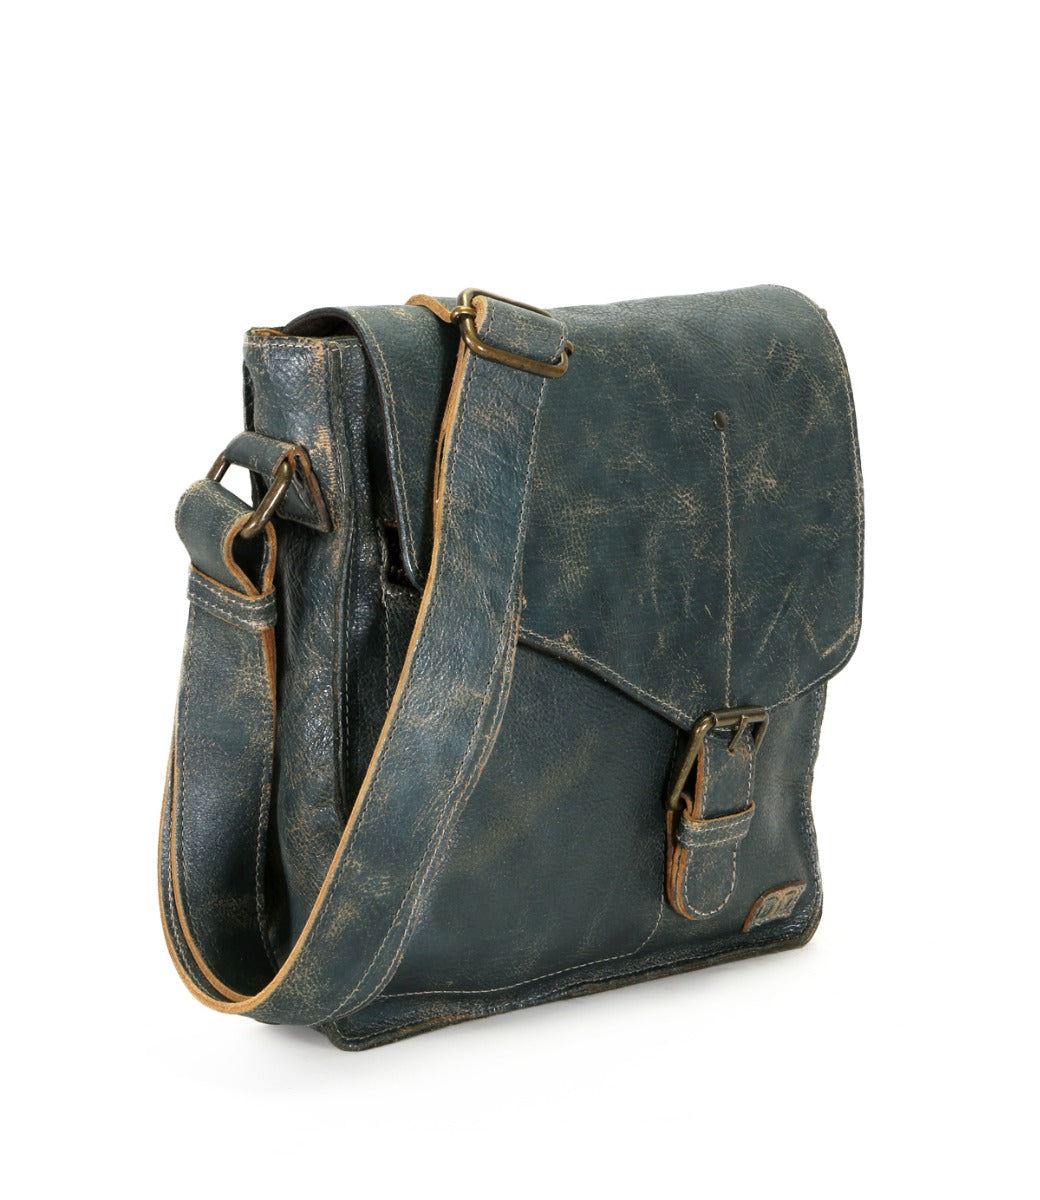 A Venice Beach teal leather messenger bag with an adjustable strap, made by Bed Stu.